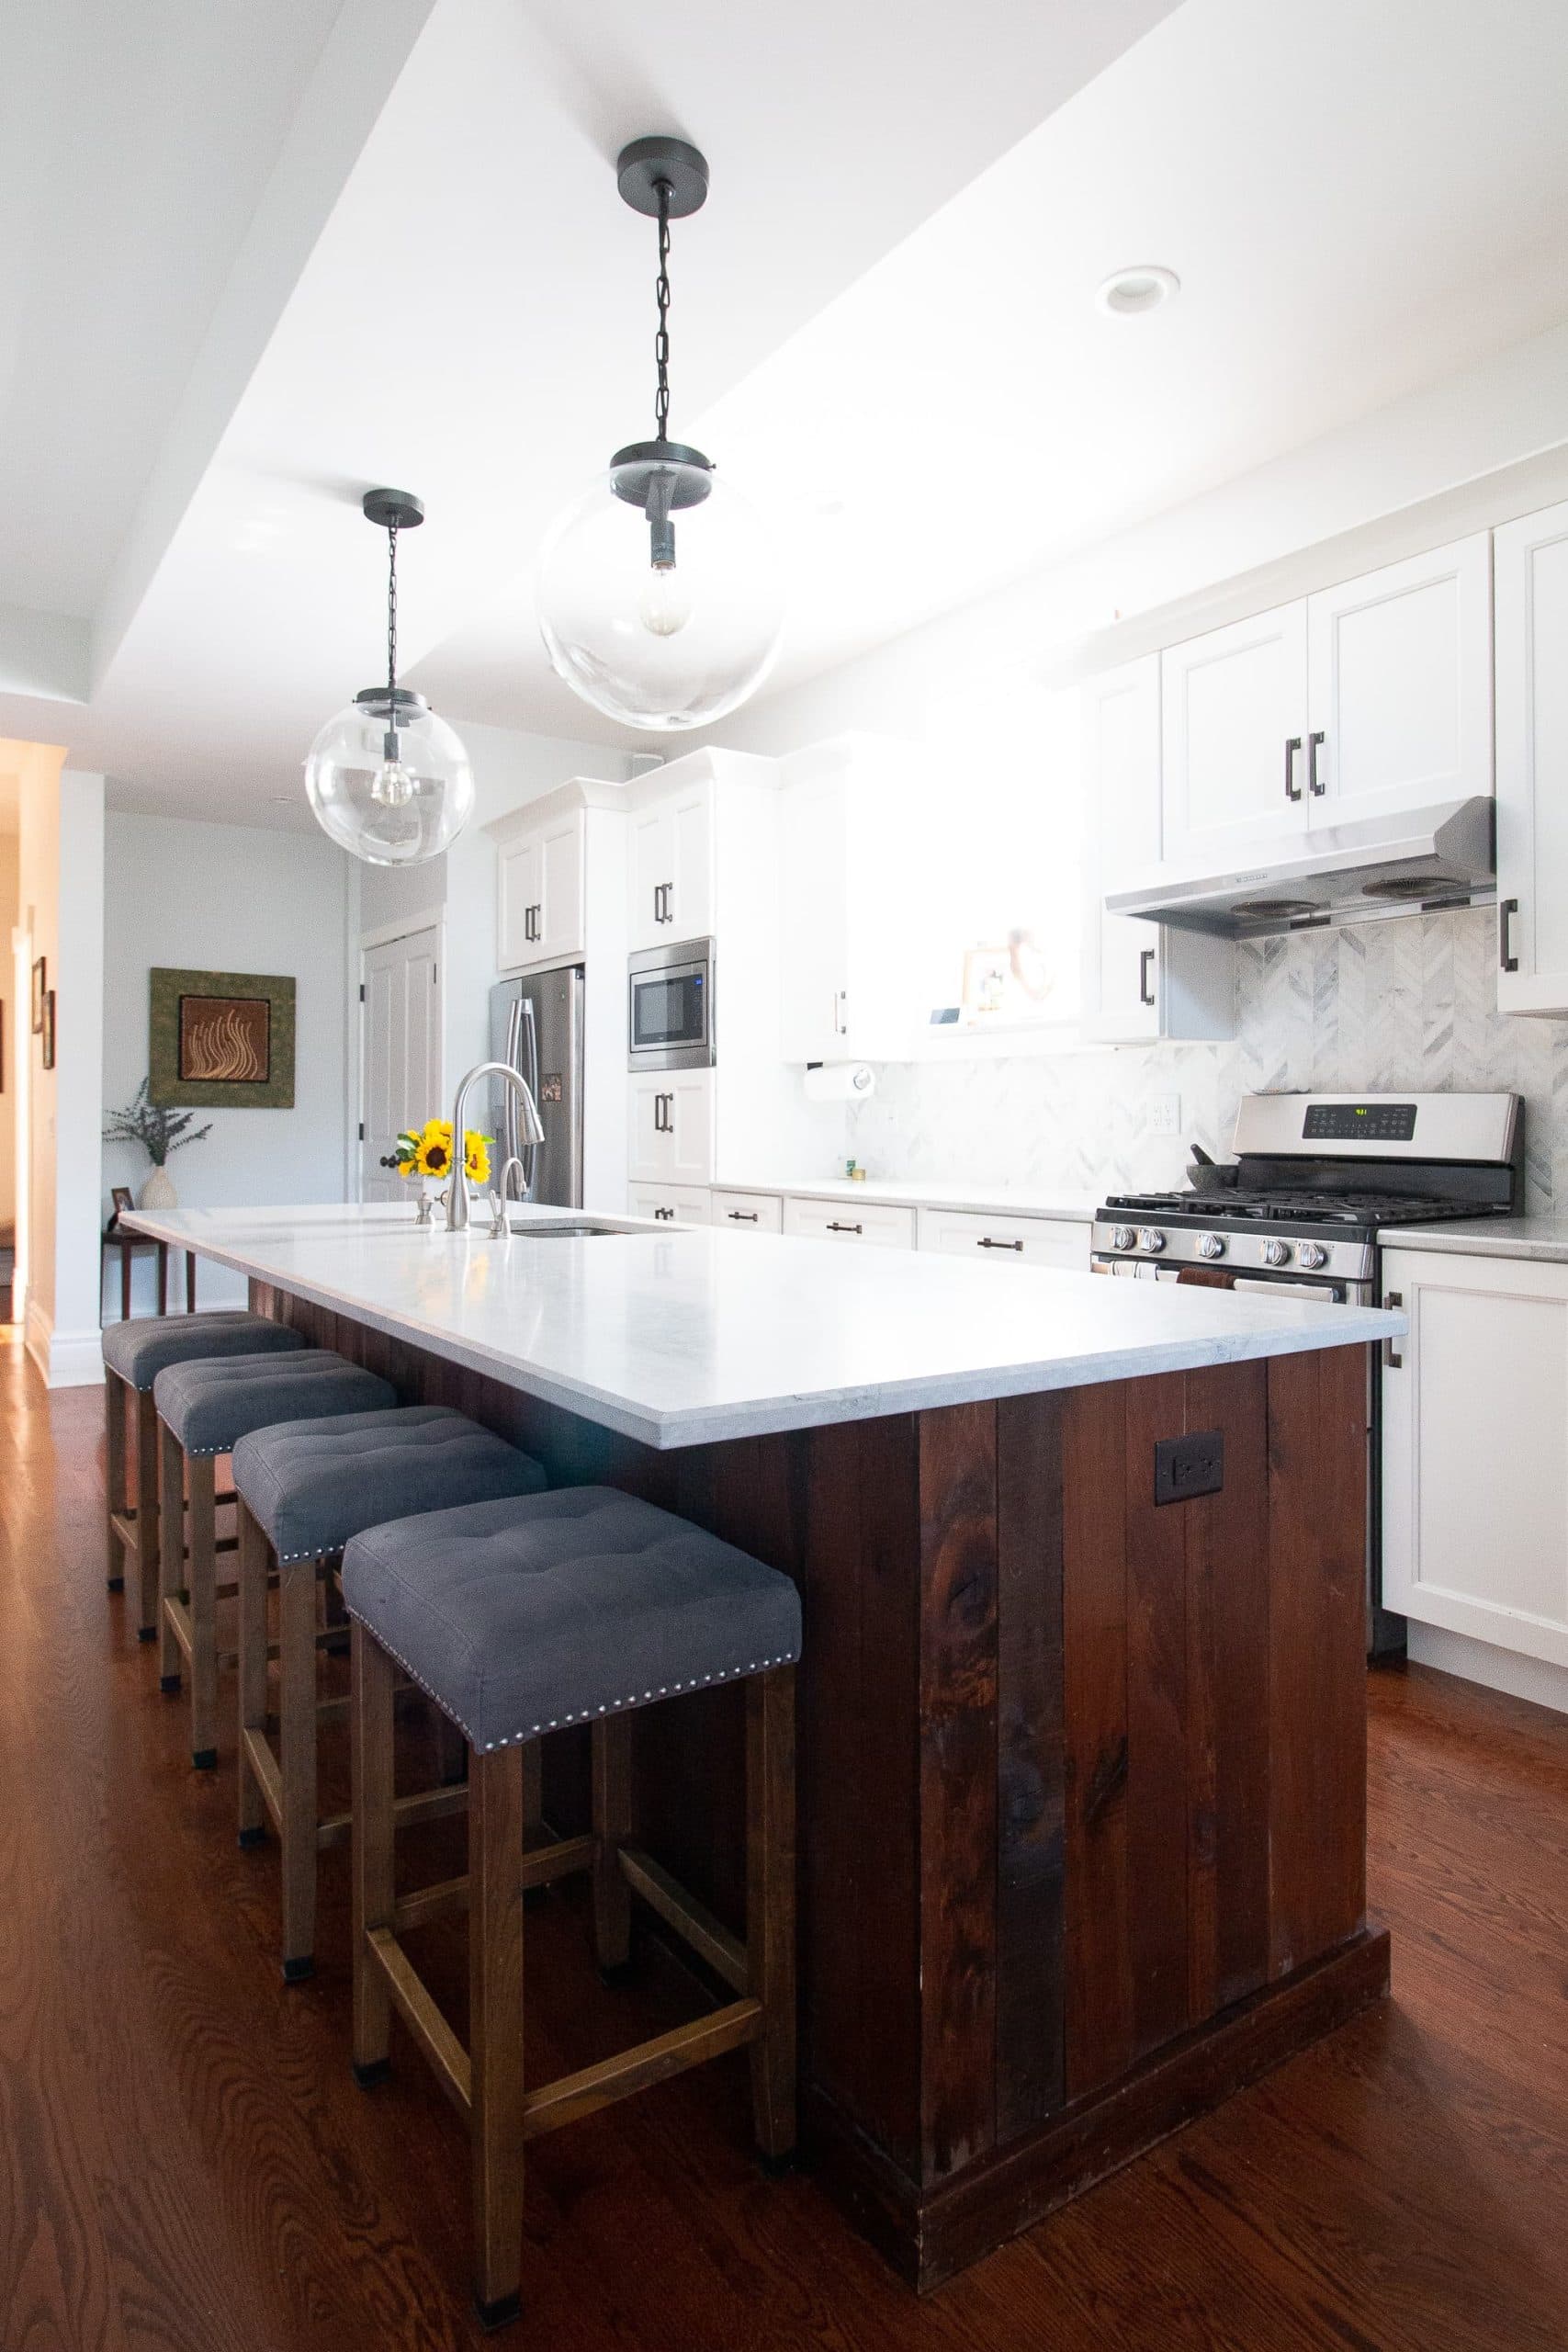 Large kitchen island with wood detailing